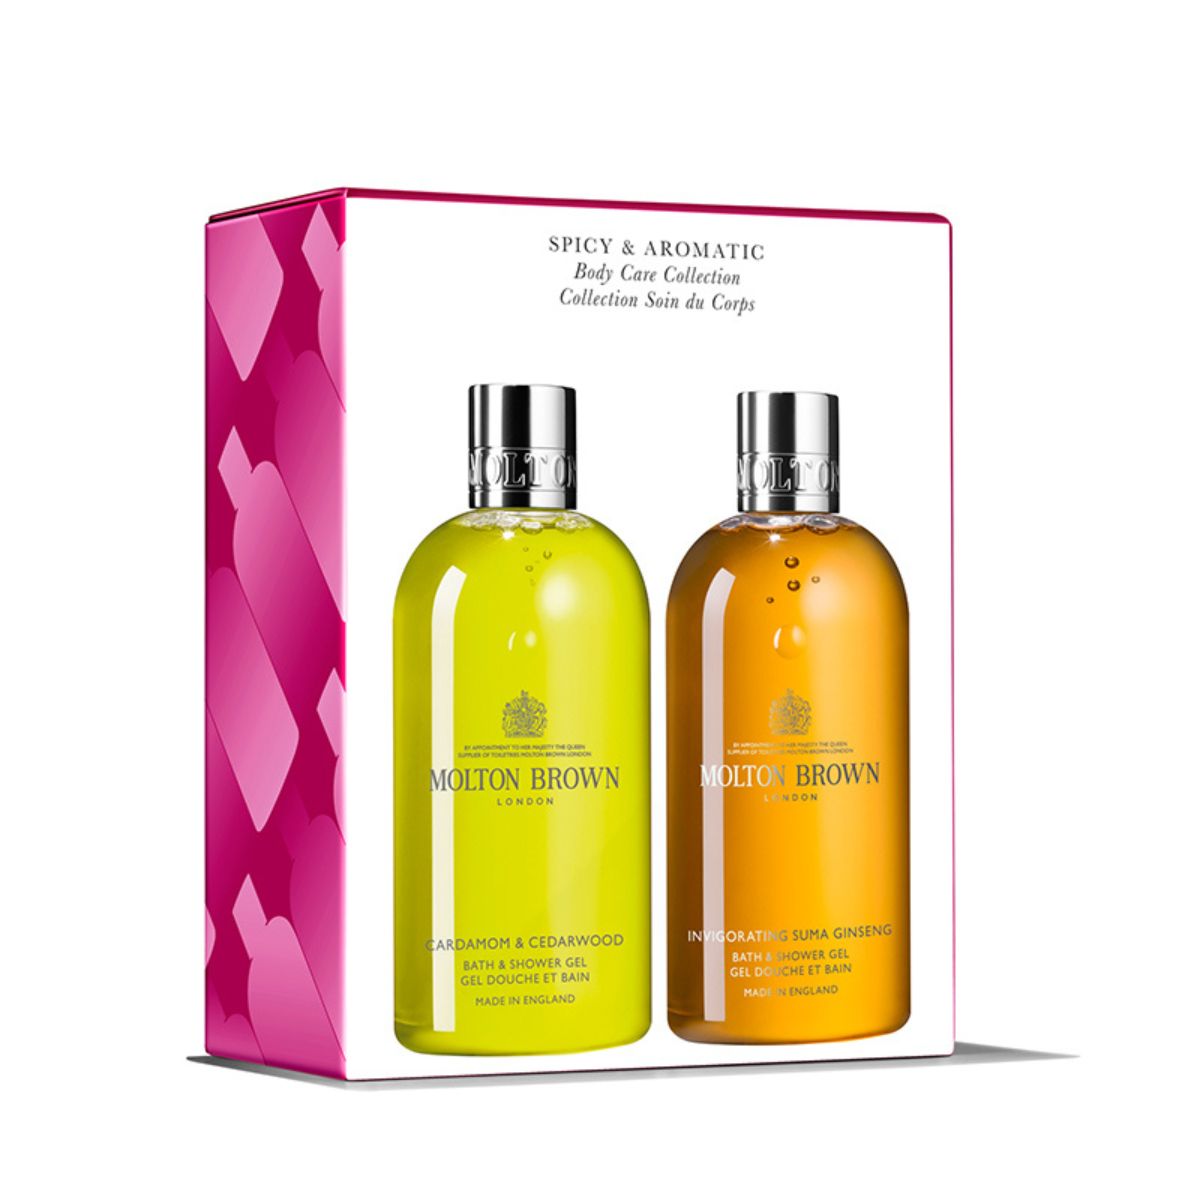 Molton Brown Spicy & Aromatic Body Care Collection SAVE 32%